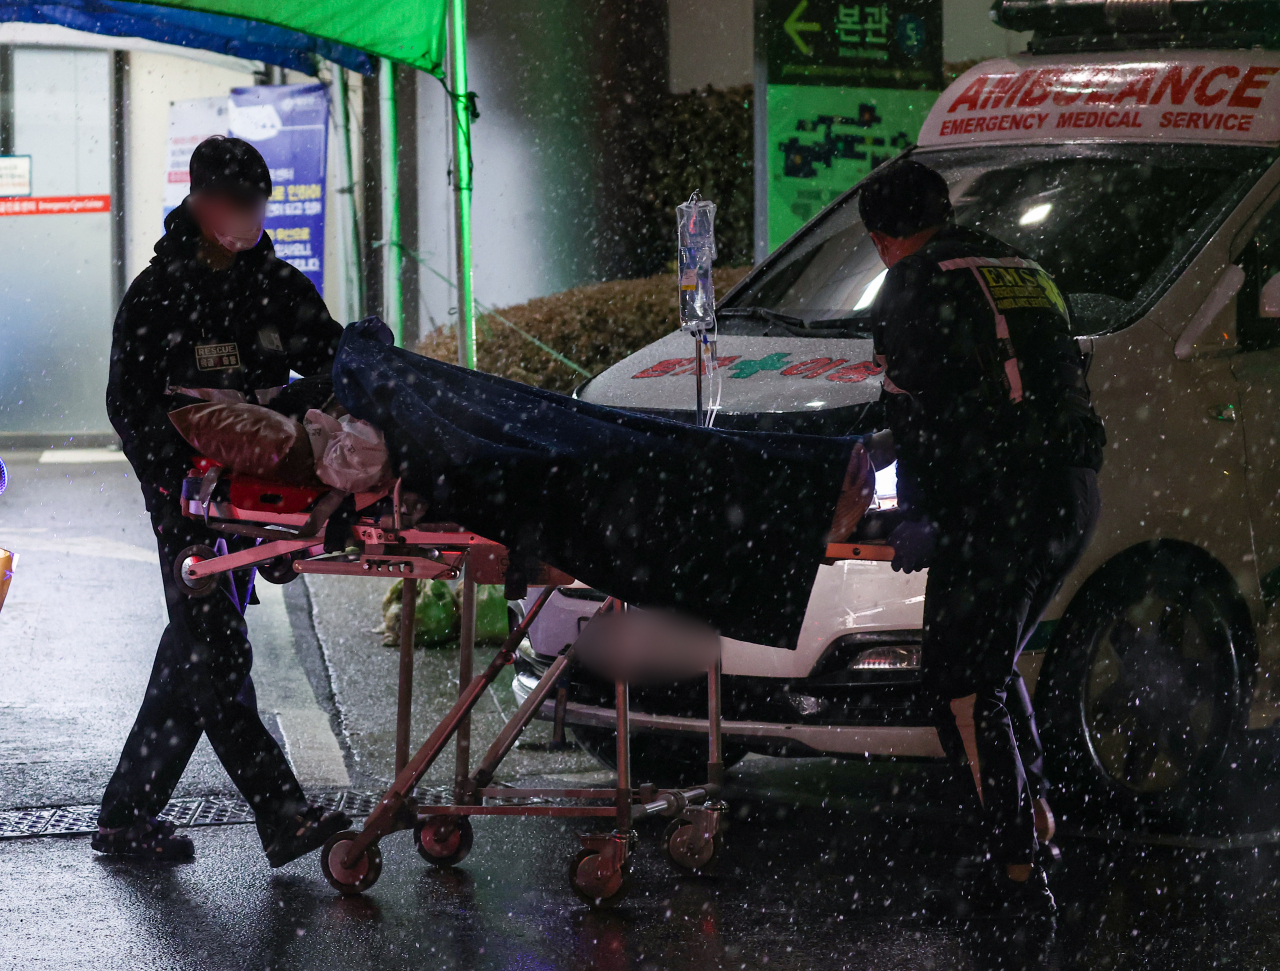 Medical personnel transport a patient in front of an emergency room at a hospital in Seoul, Wednesday. (Yonhap)